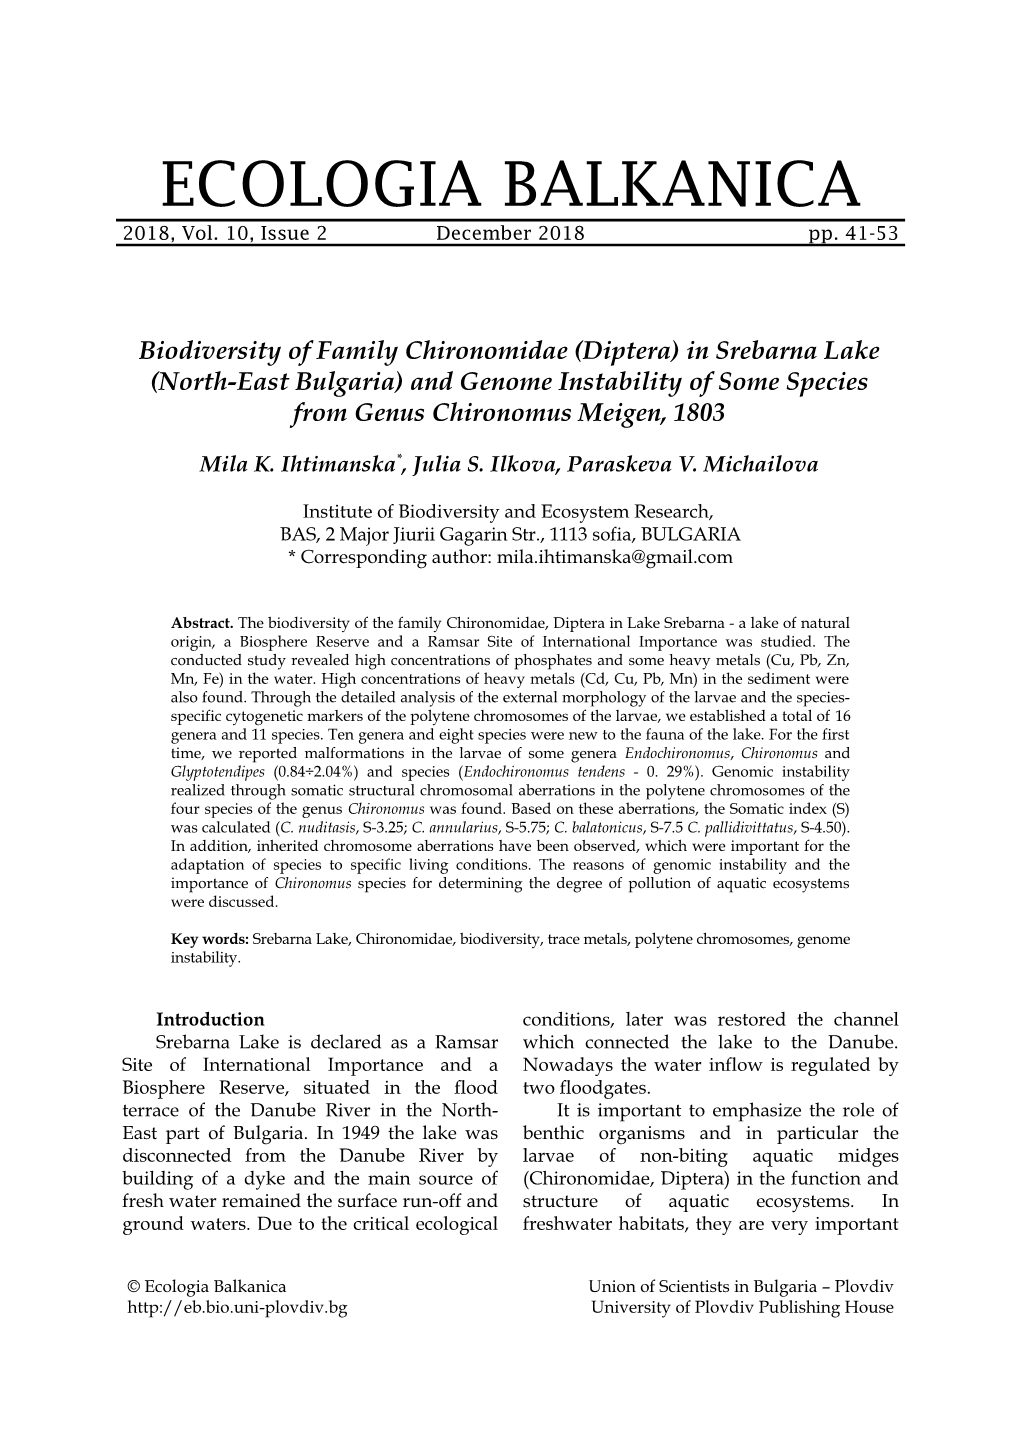 Biodiversity of Family Chironomidae (Diptera) in Srebarna Lake (North-East Bulgaria) and Genome Instability of Some Species from Genus Chironomus Meigen, 1803